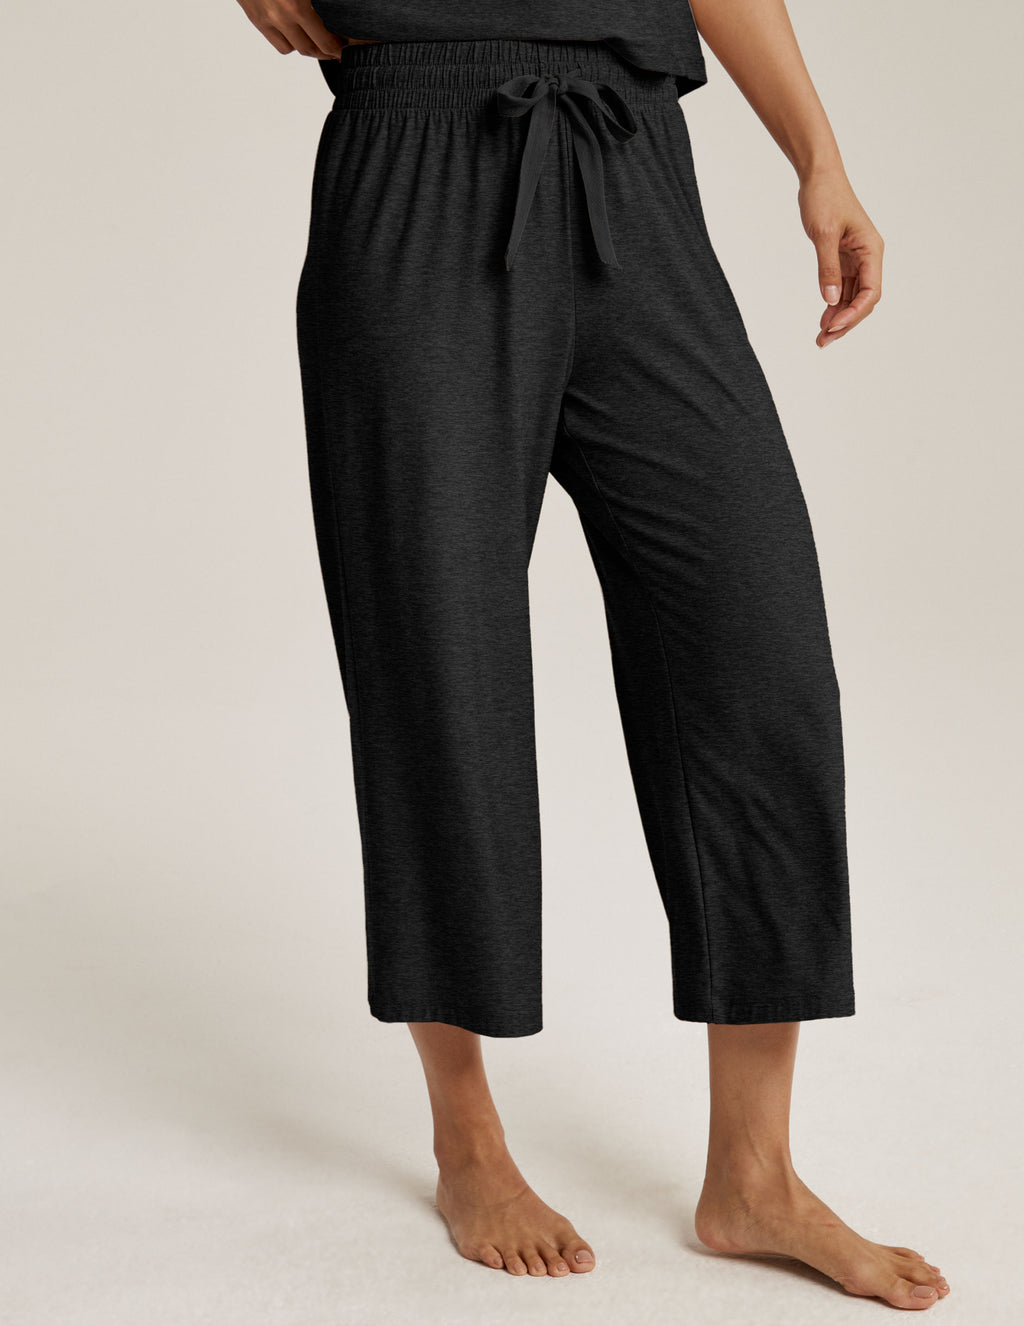 Featherweight Own The Night Sleep Pant Featured Image